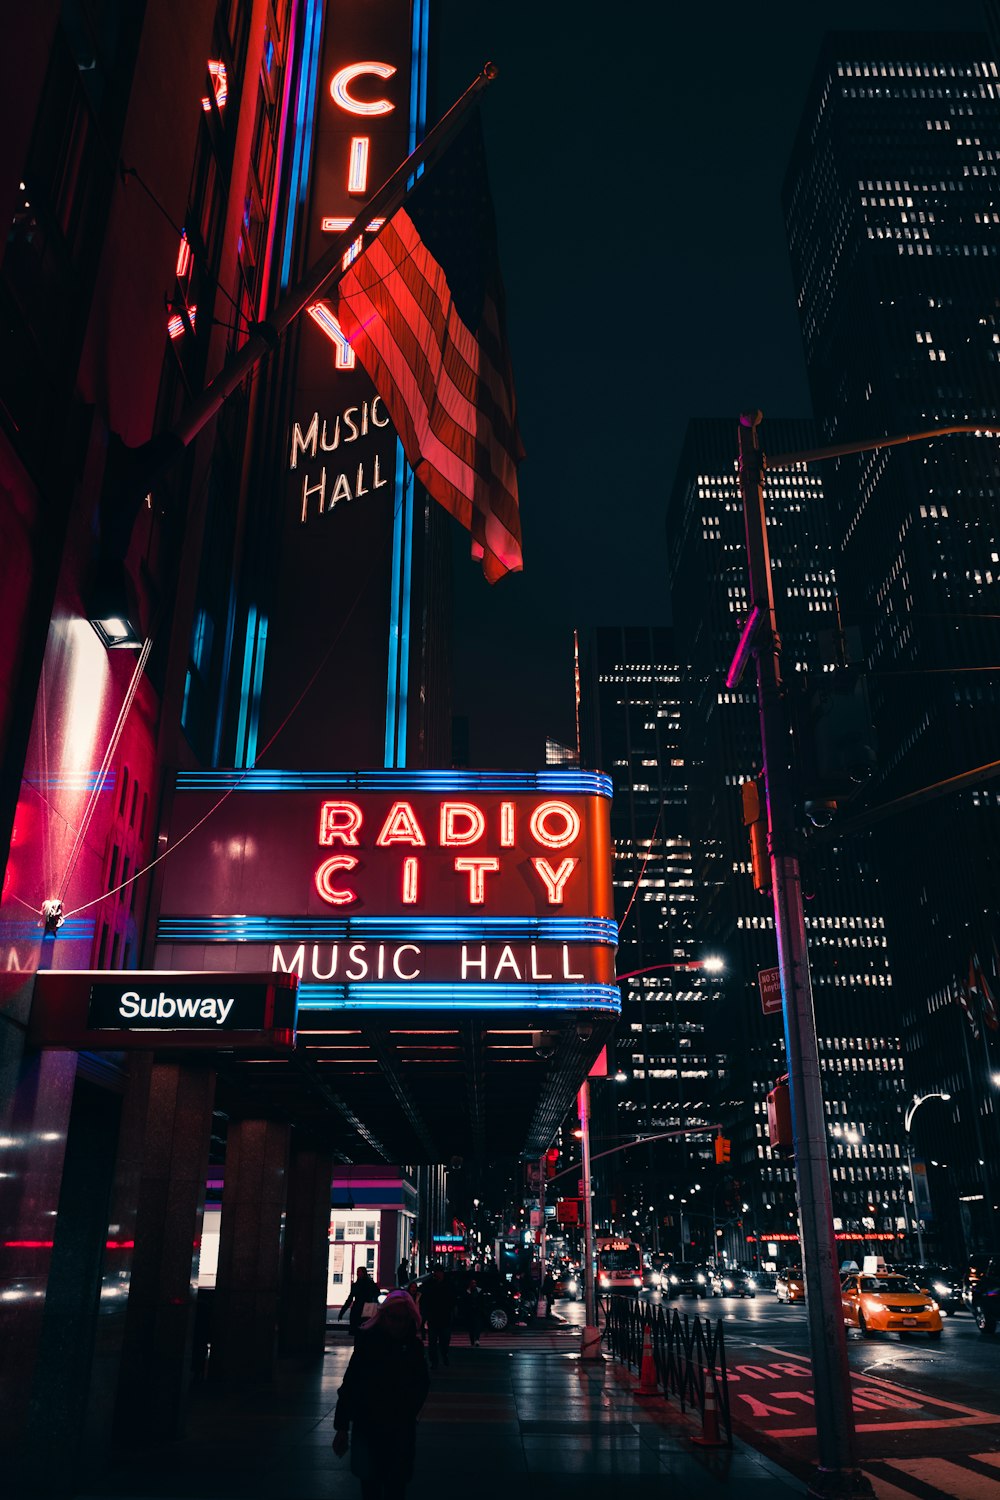 the radio city sign is lit up at night